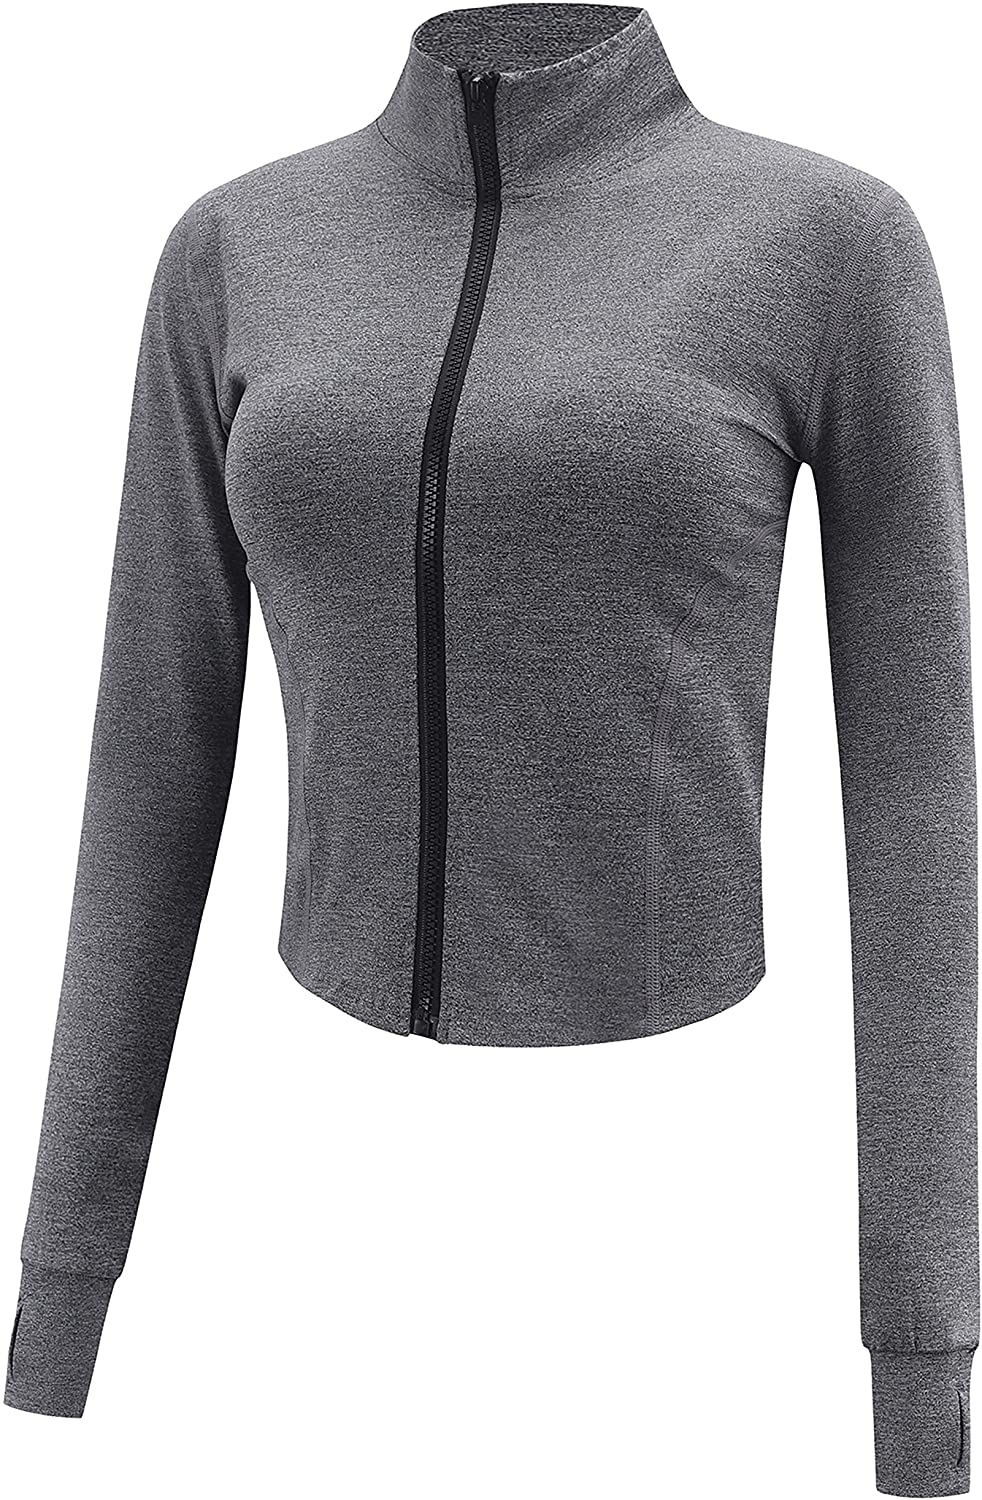 Women's Athletic and Workout Jackets